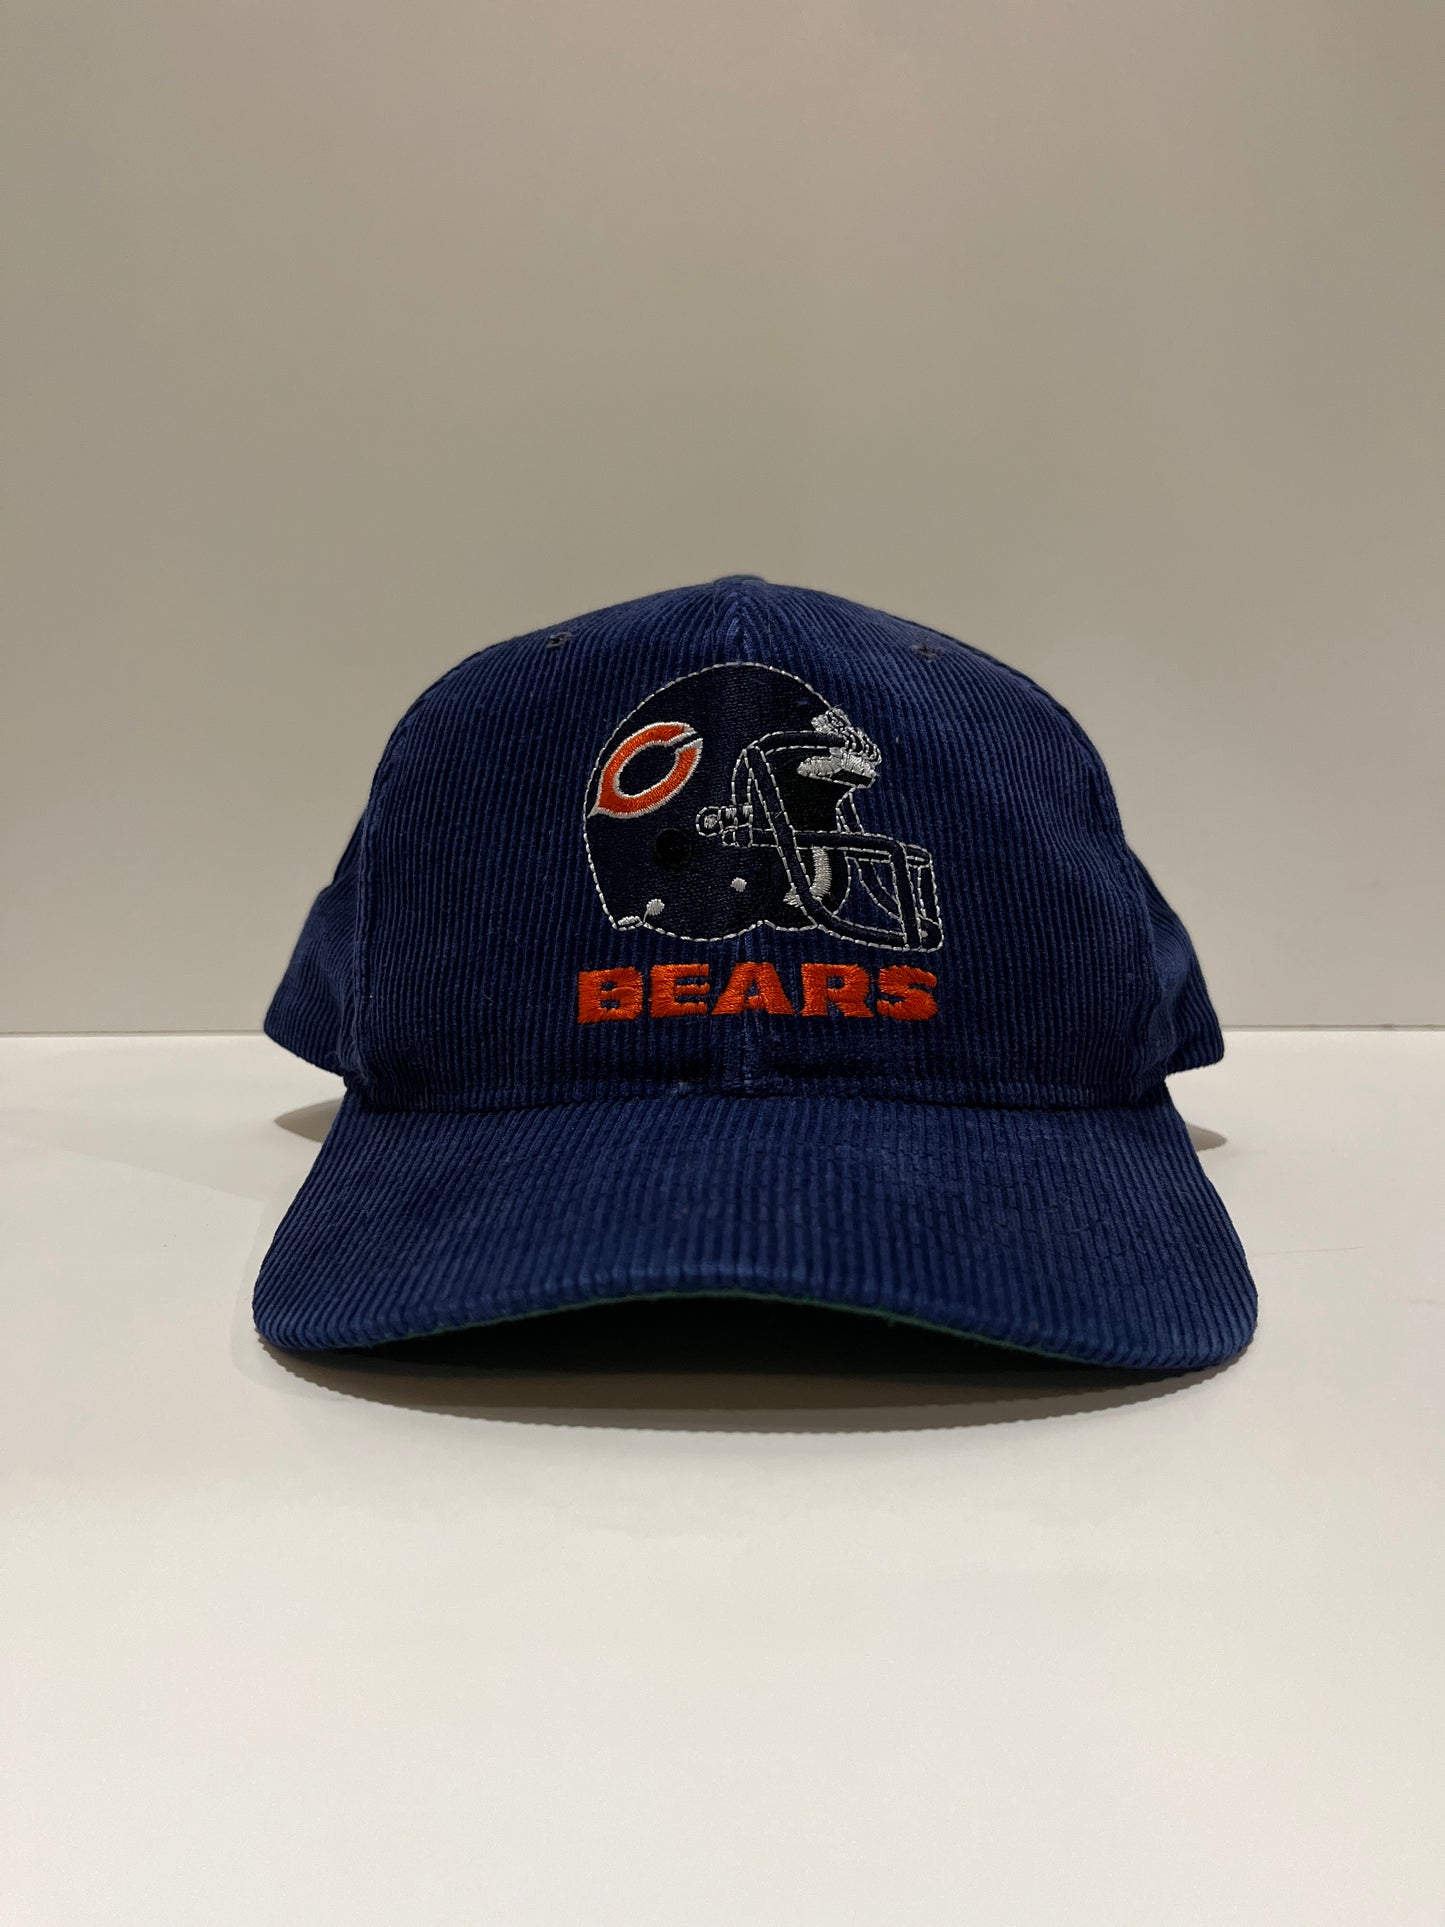 Vintage NFL The Classic Chicago Bears Snapback Hat